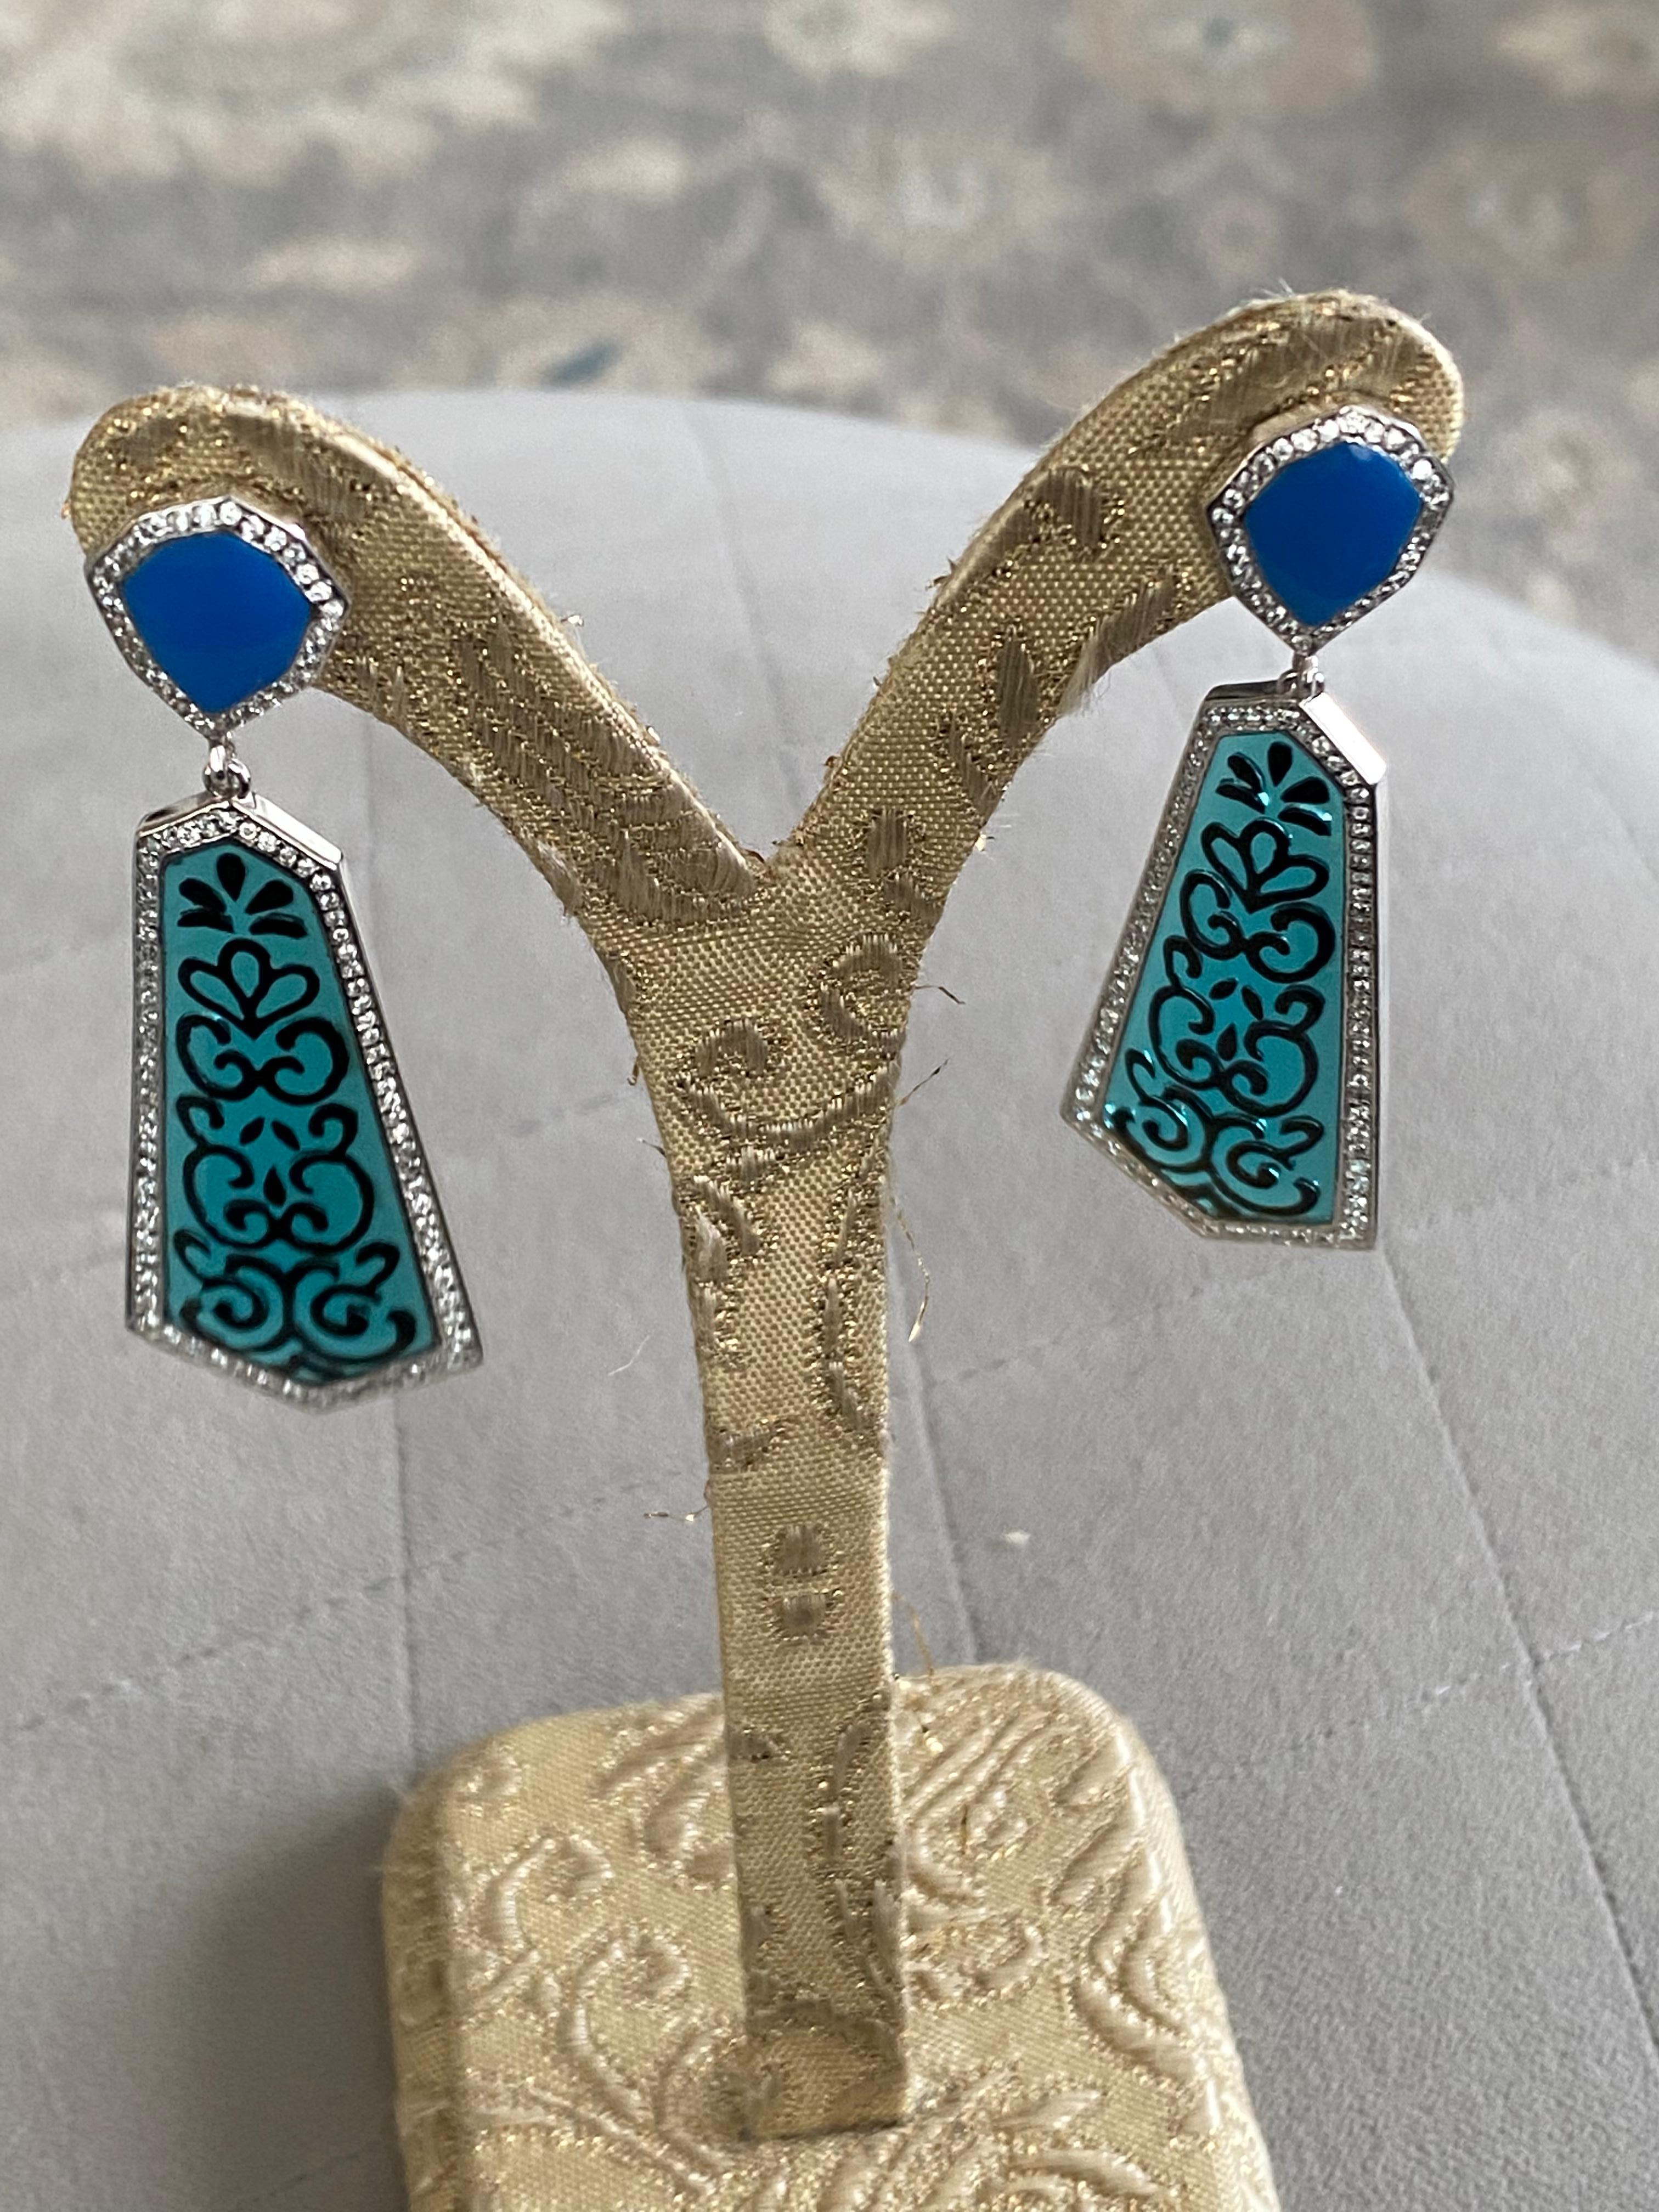 Miriam Salat Drop Earrings - This fantastic Miriam Salat earrings features filagree blue resin with  sterling silver.
Channel set Zircon accents on the body and hand set hook closures. Earrings measure apx. 3 inches in length and apx. 0.5 inch in